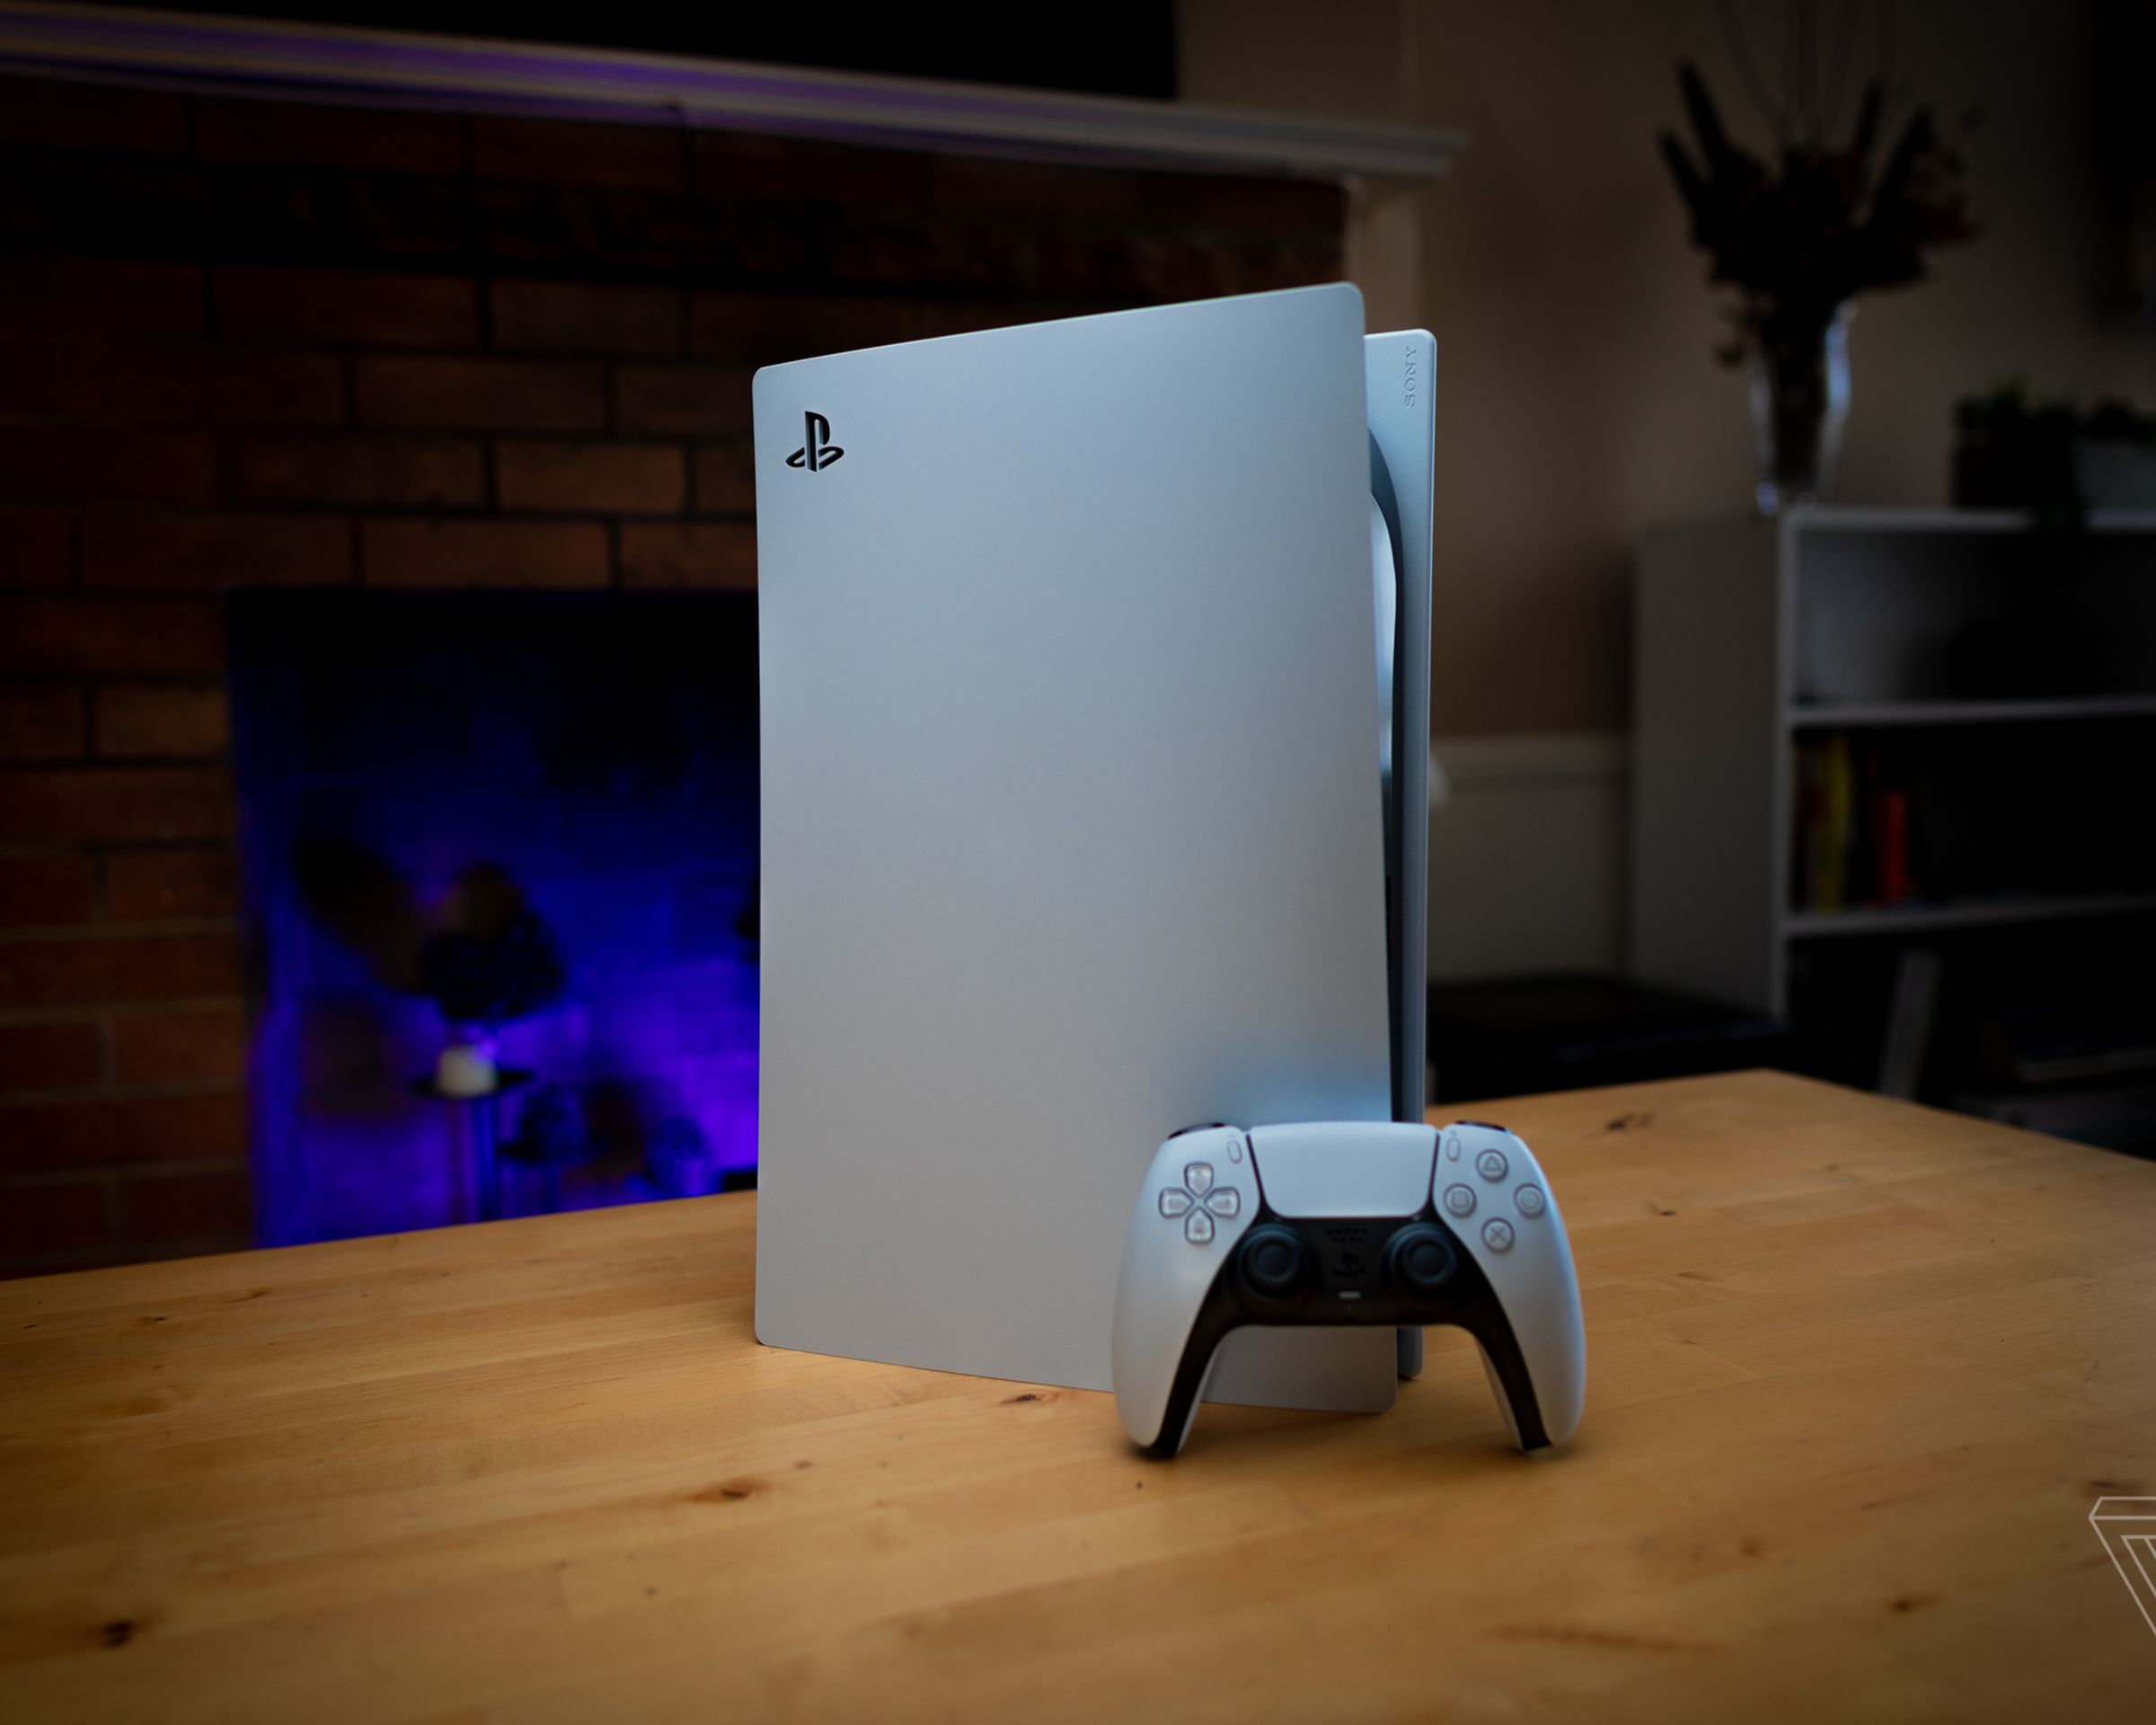 A PS5 console on a wooden table.